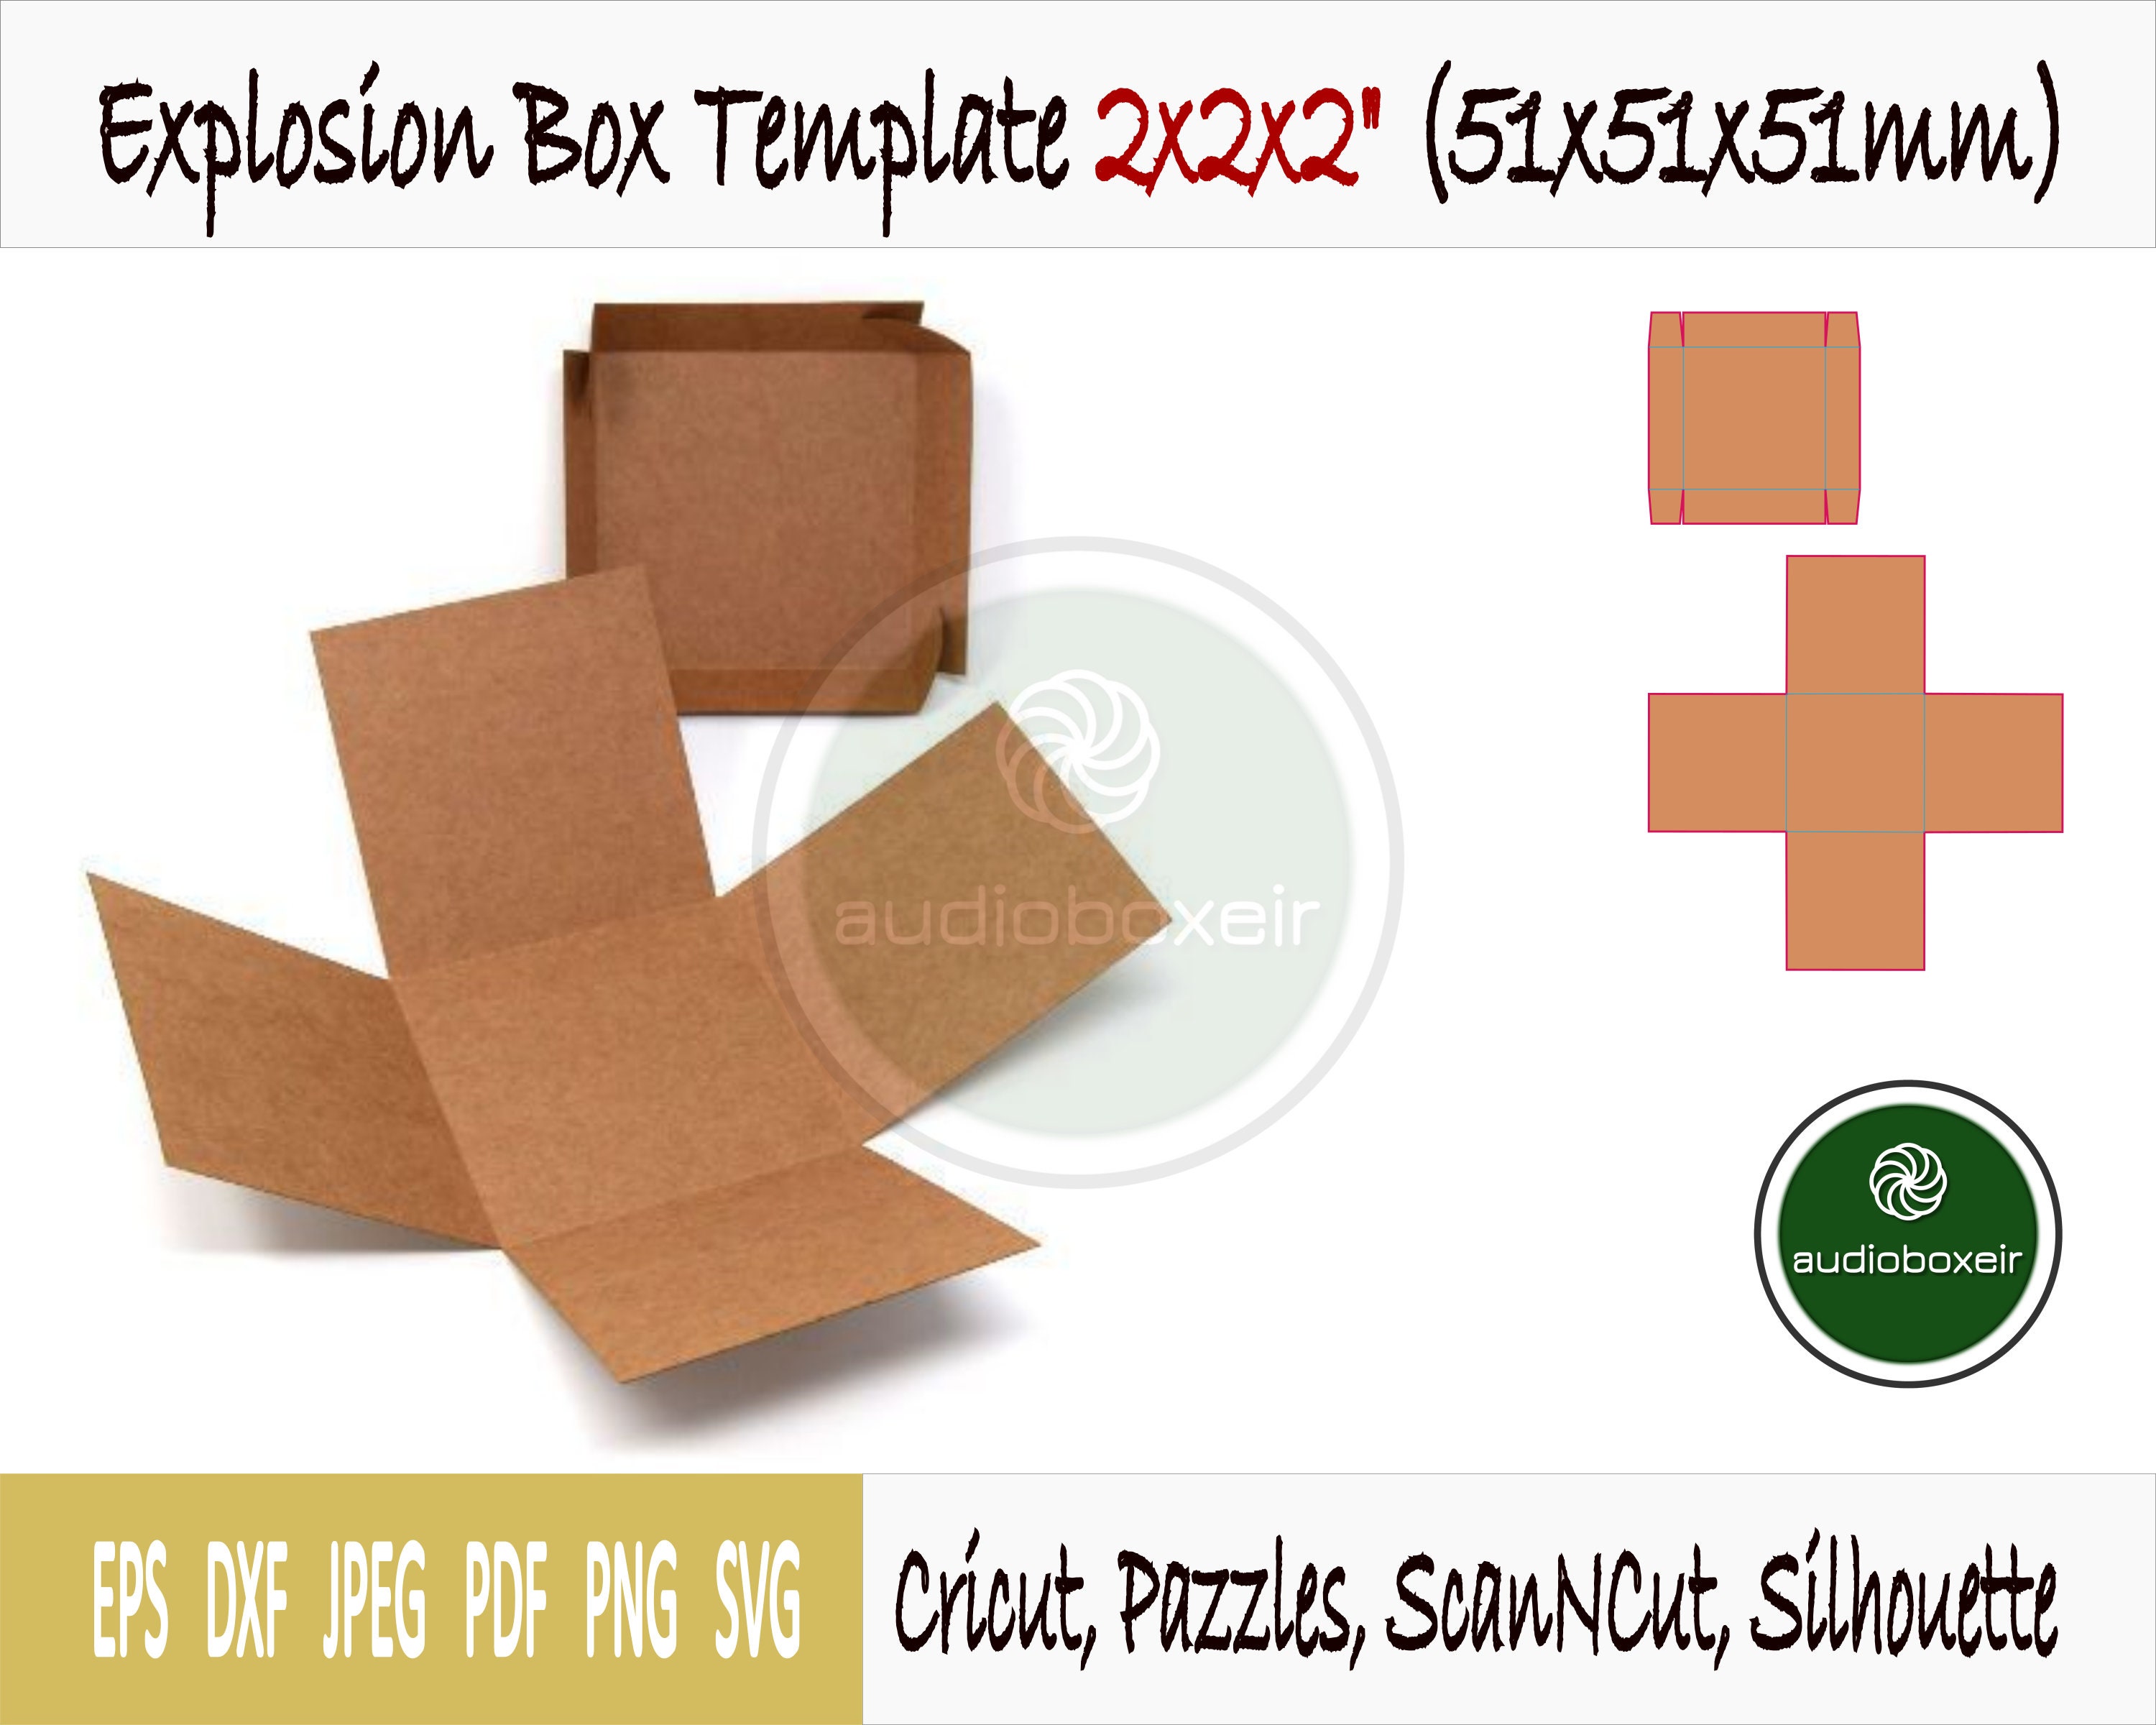 Template of Box for Round Hat 12x8x2 -   Box template, Gift box  template, Round hat